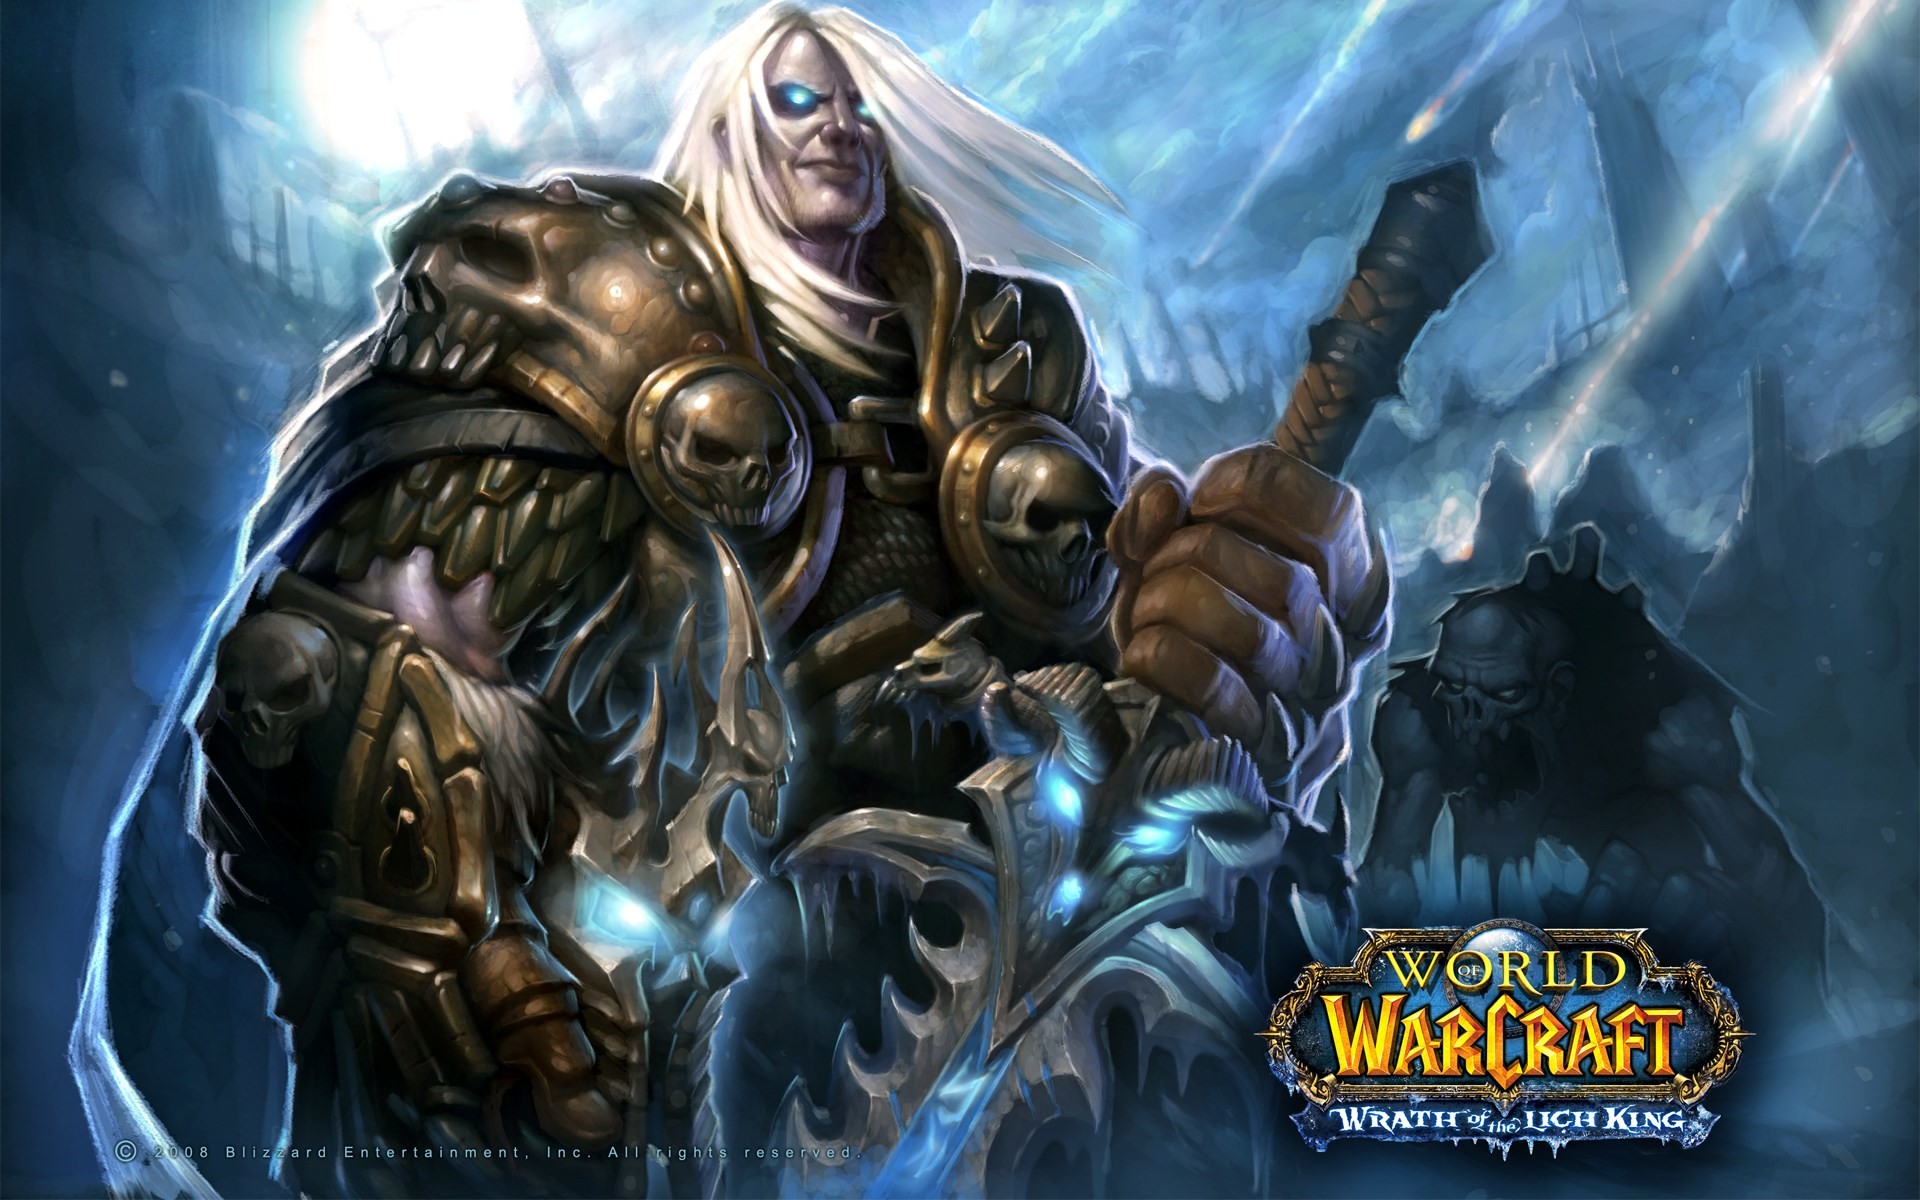 1920x1200 High Quality World of Warcraft: Wrath of the Lich King wallpaper, Stan  Round 2016